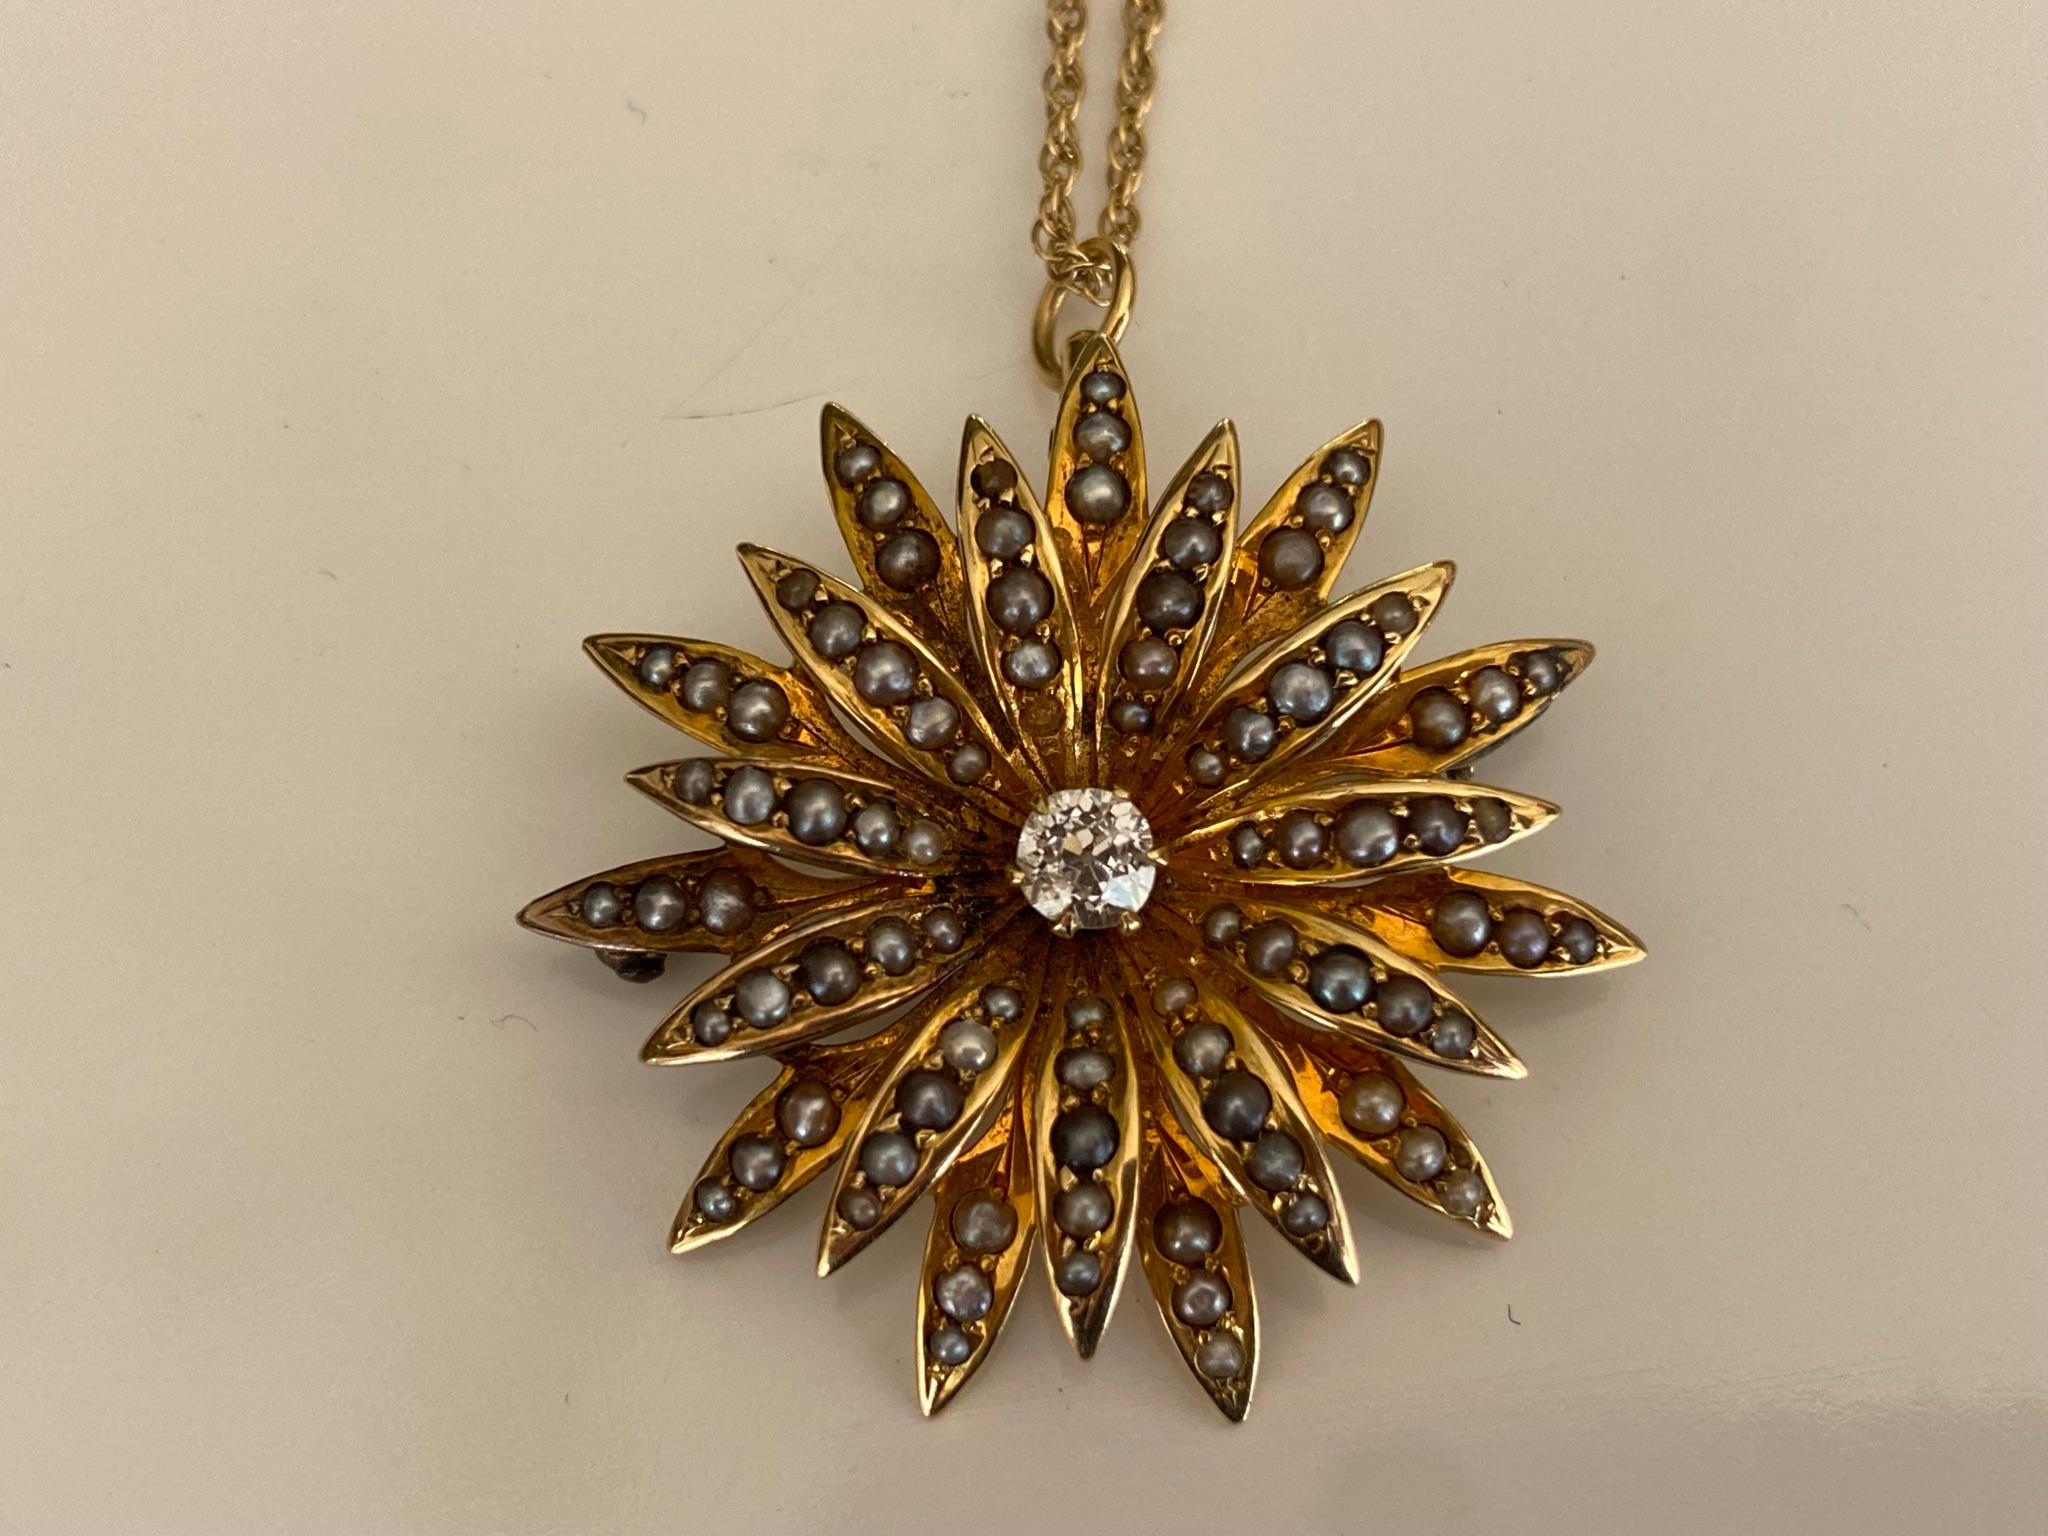 Crafted in the late nineteenth century from 14kt yellow gold, this classic late-Victorian era pendant necklace is designed around an Old Mine cut diamond center stone totaling approximately 0.25 carats and accented with natural seed pearls radiating